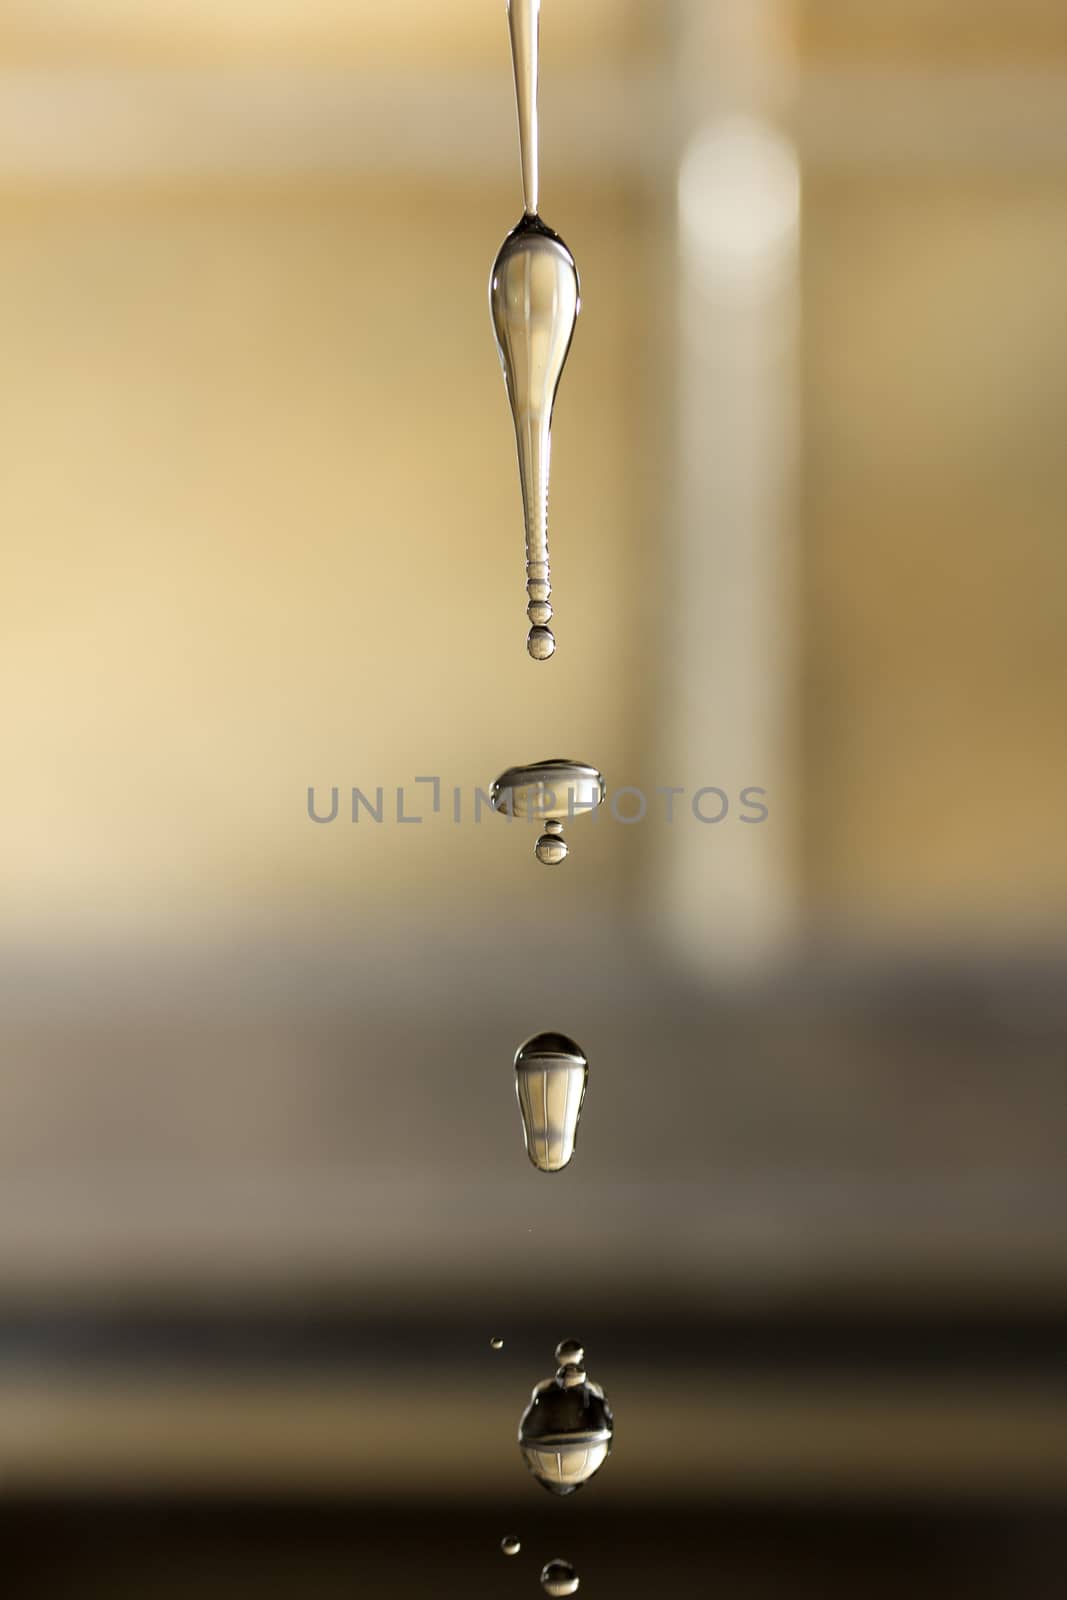 water, water drops by Tomjac1980